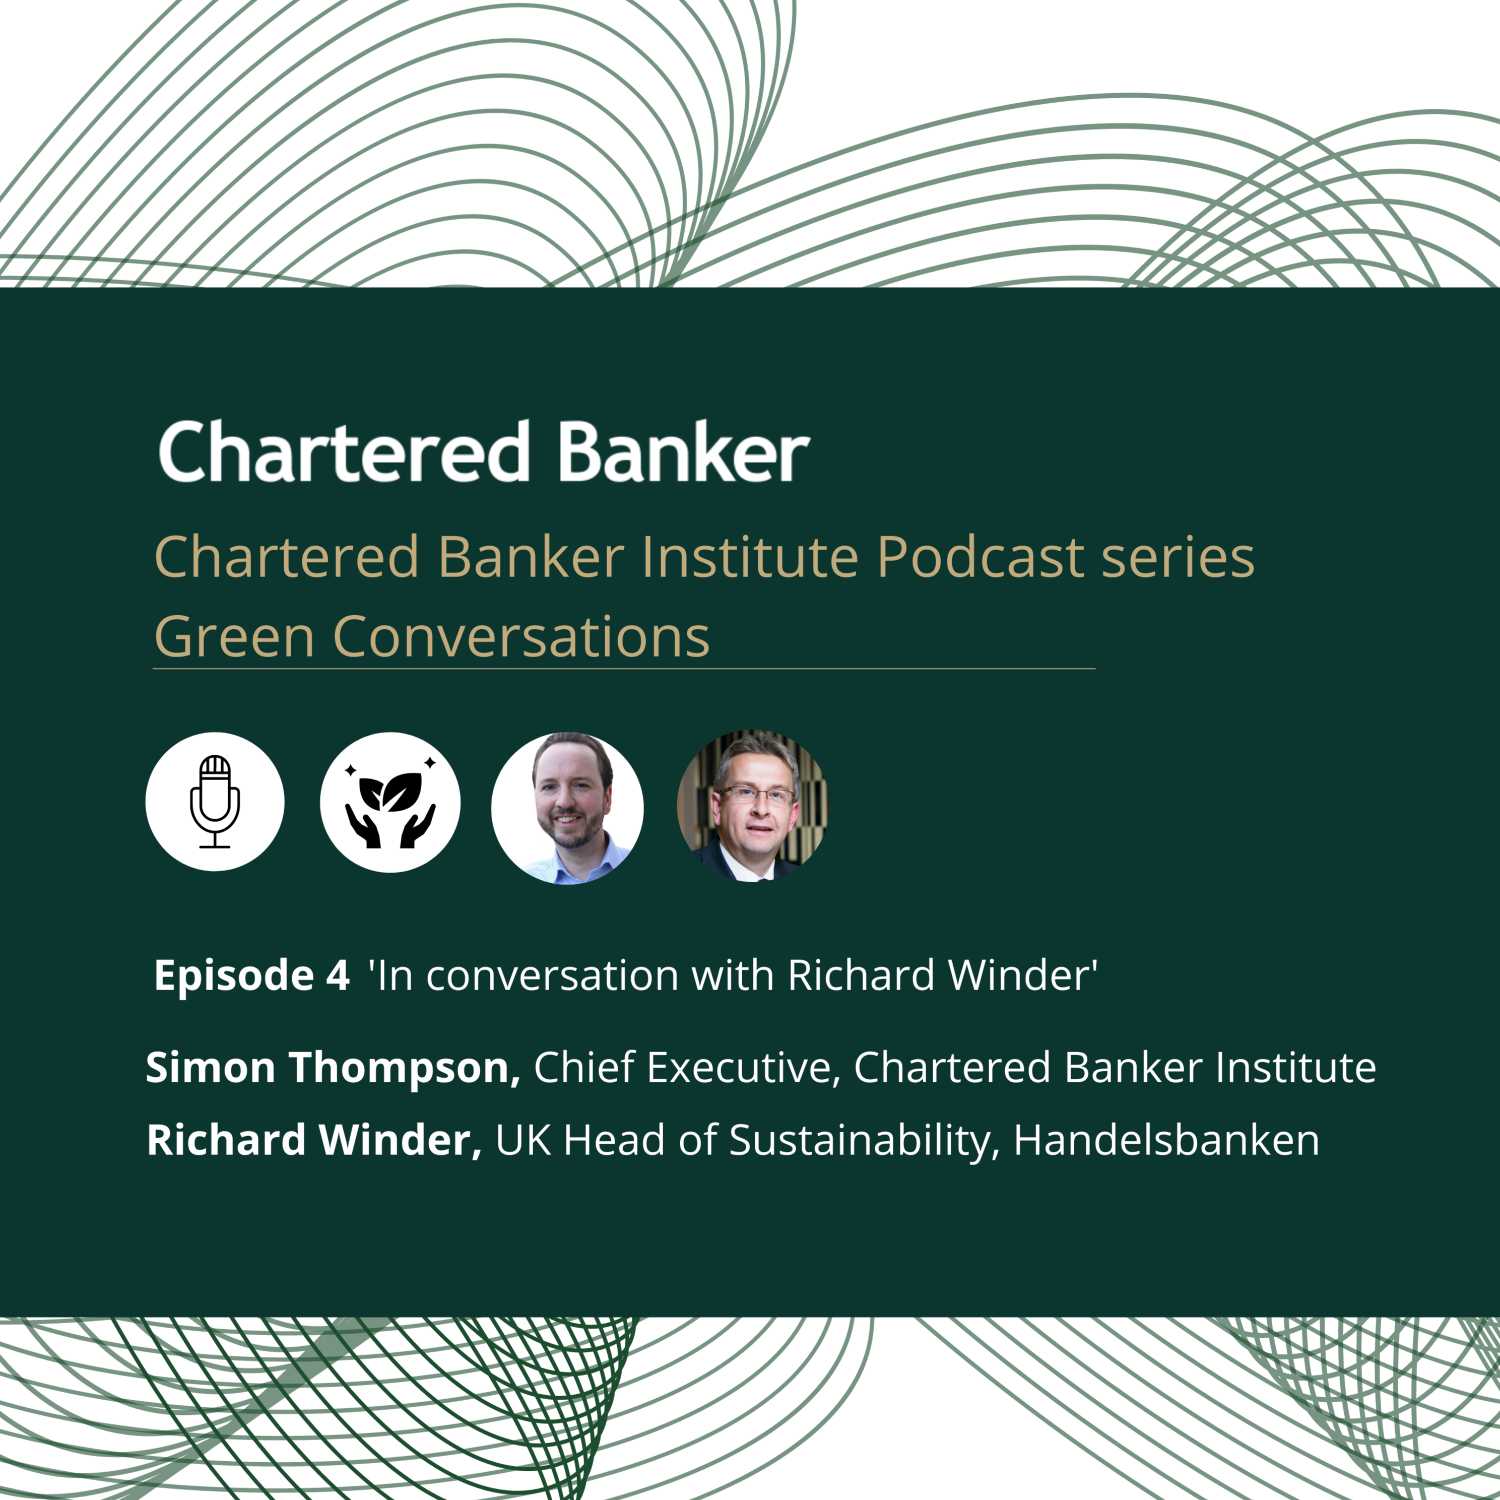 S3 E4 In conversation with Richard Winder - Green Conversations